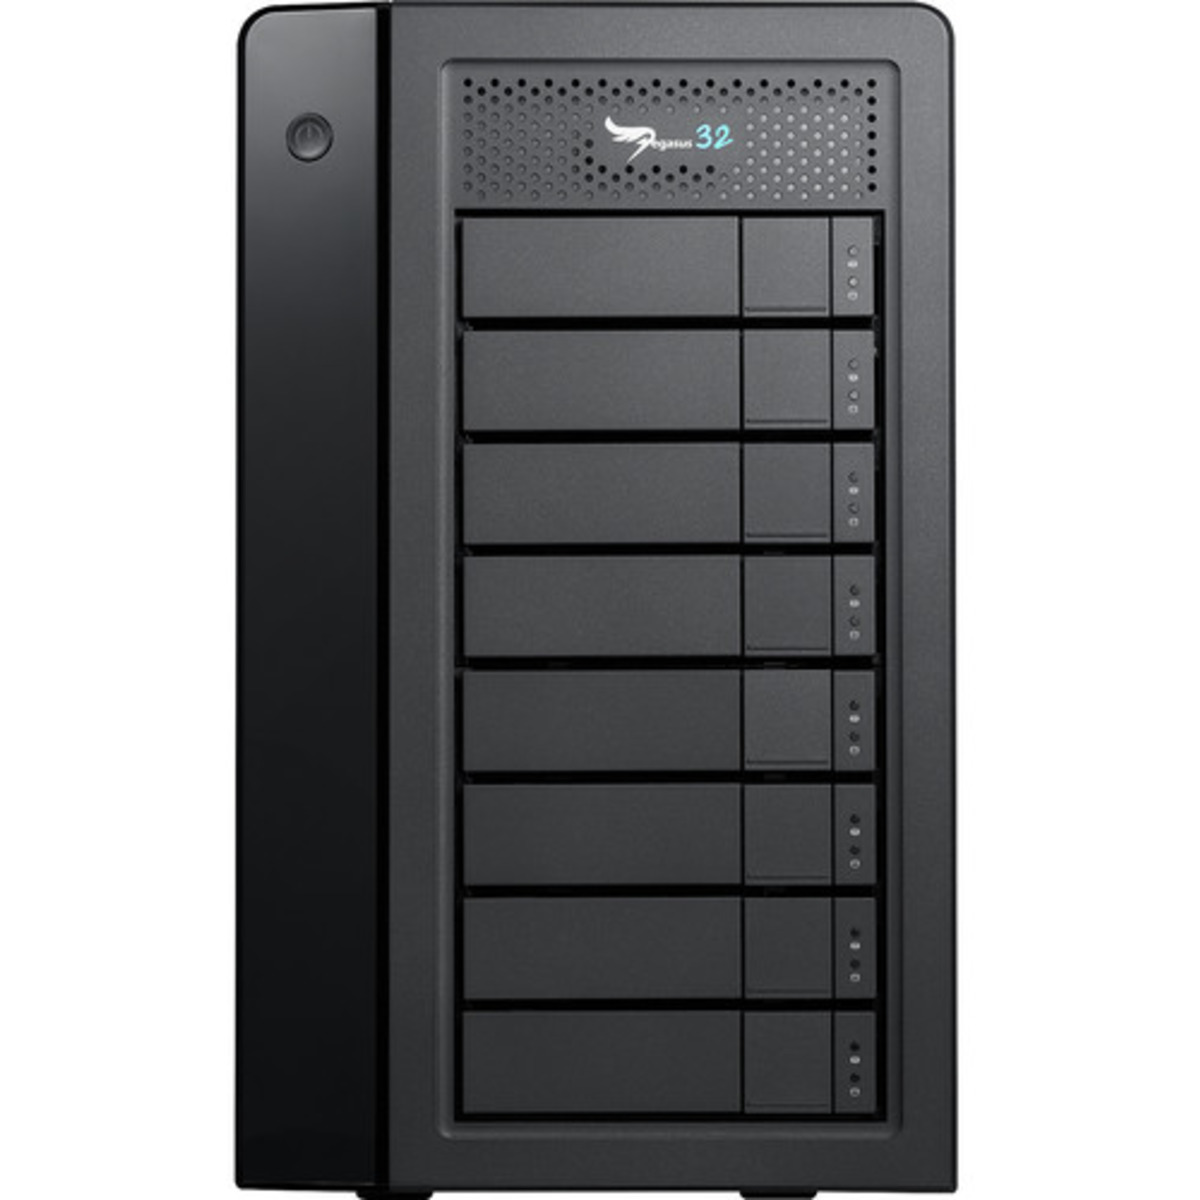 Promise Technology Pegasus32 R8 Thunderbolt 3 50tb 8-Bay Desktop Multimedia / Power User / Business DAS - Direct Attached Storage Device 5x10tb Seagate IronWolf ST10000VN000 3.5 7200rpm SATA 6Gb/s HDD NAS Class Drives Installed - Burn-In Tested - ON SALE Pegasus32 R8 Thunderbolt 3